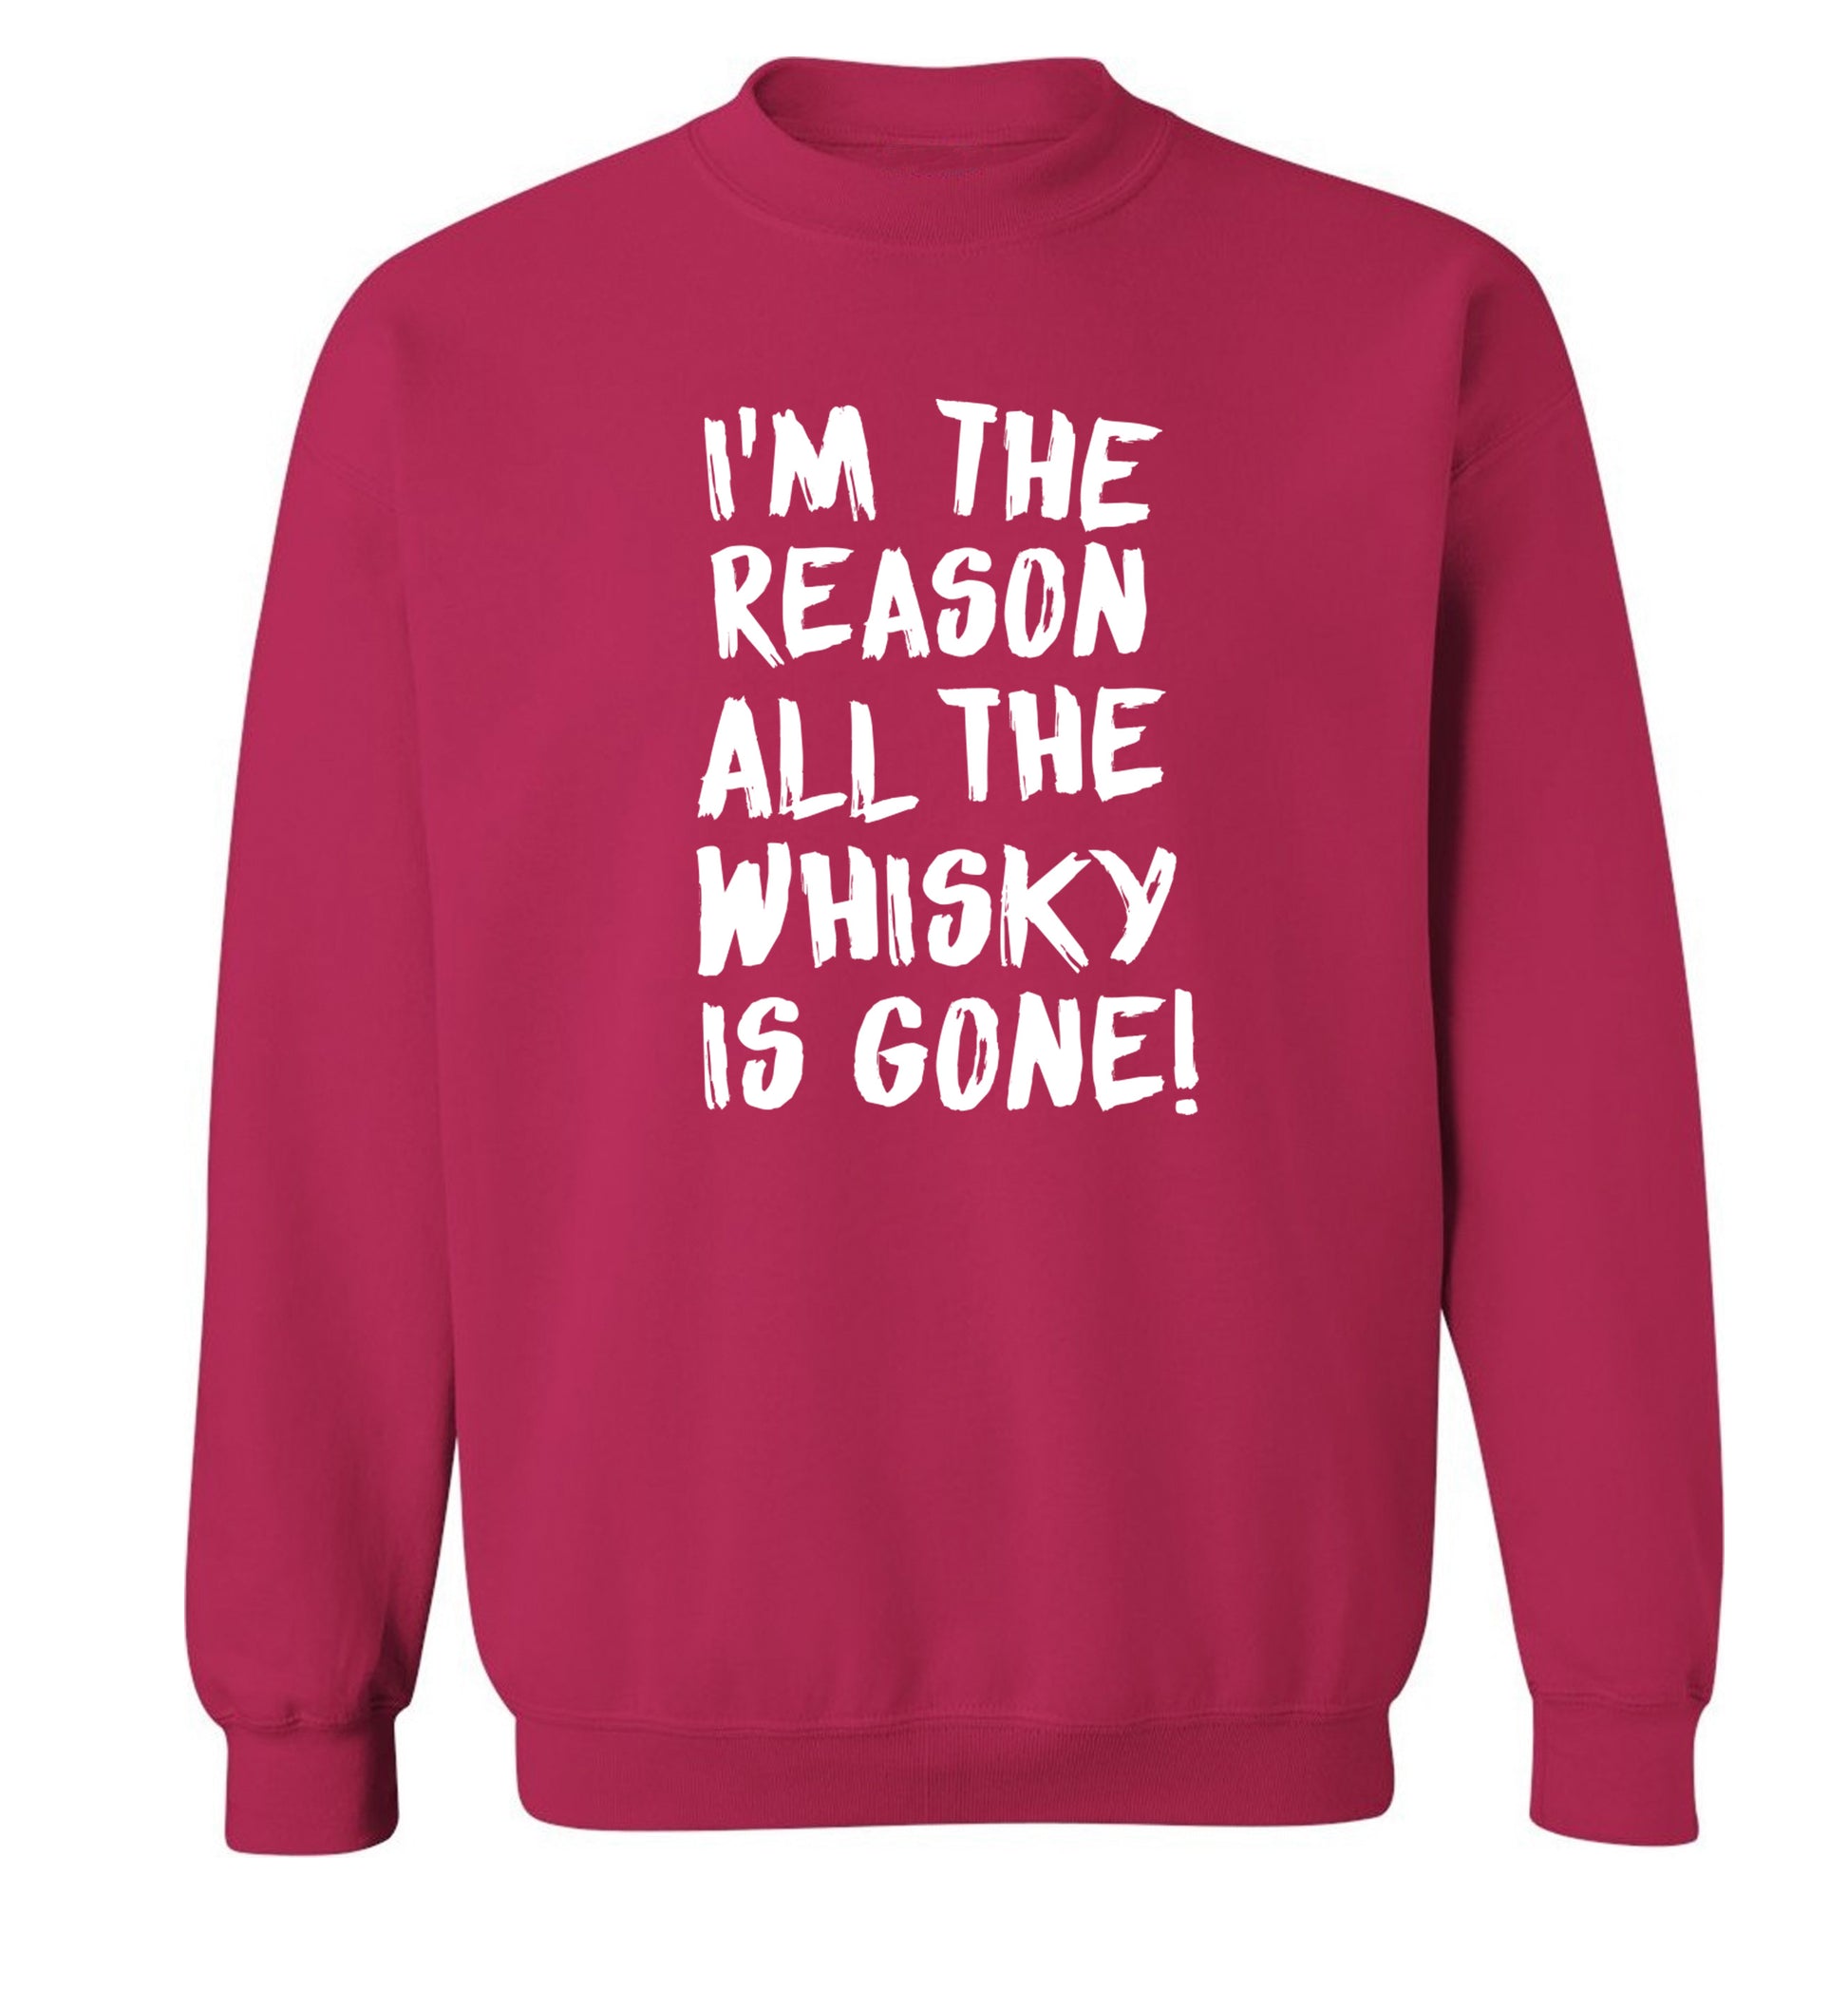 I'm the reason all the whisky is gone Adult's unisex pink Sweater 2XL